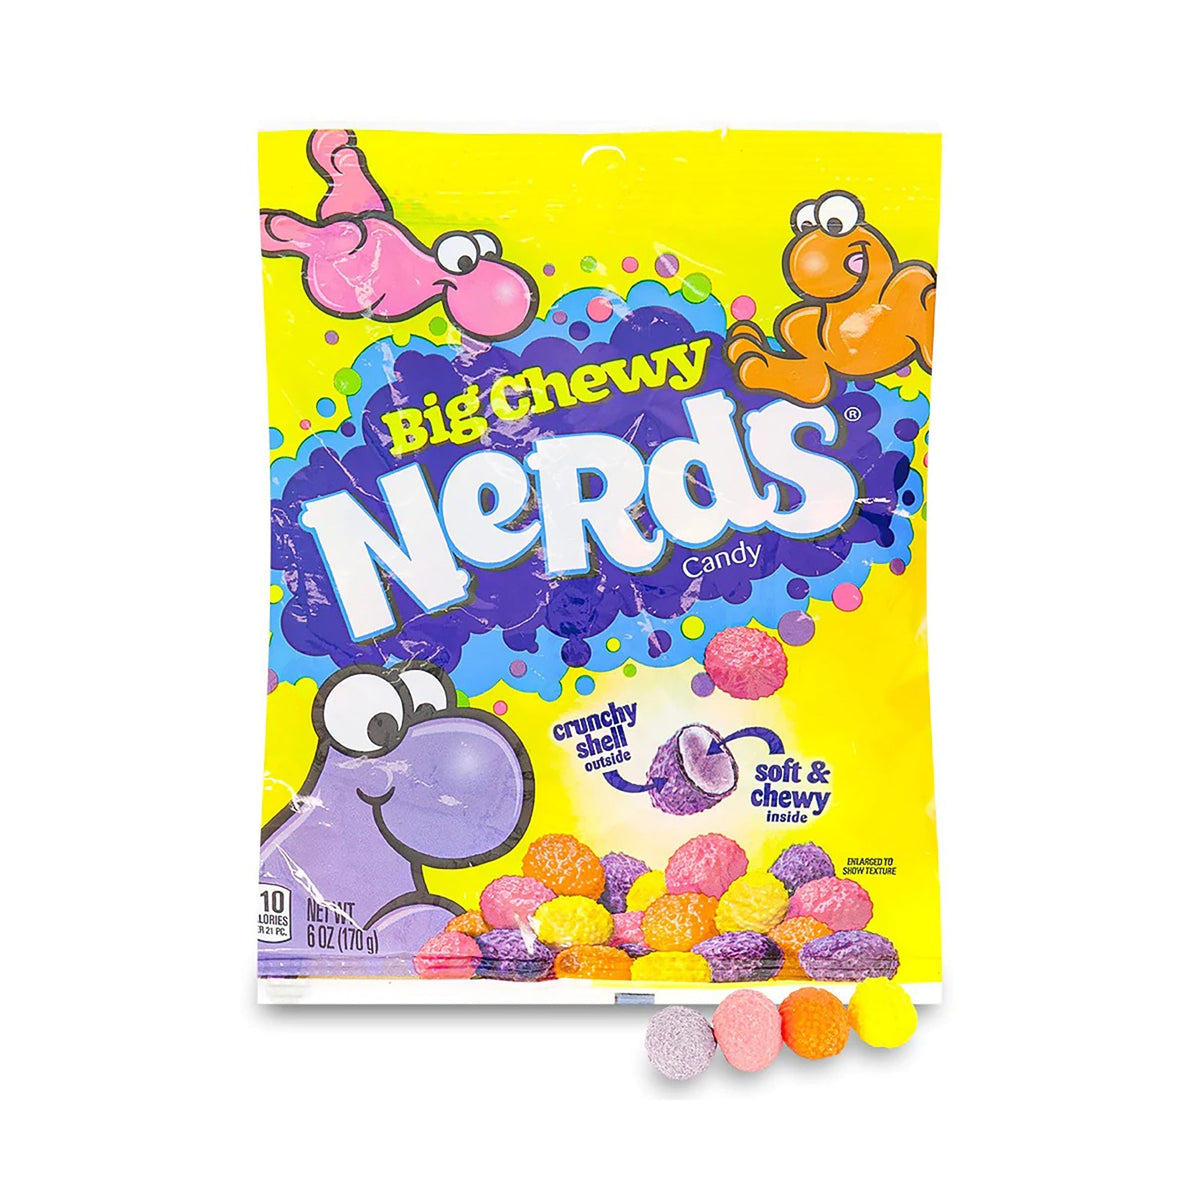 CONFISERIE MONDOUX INC. Candy Wonka Nerds Big Chewy Candy, 170g, 1 Count 079200049829